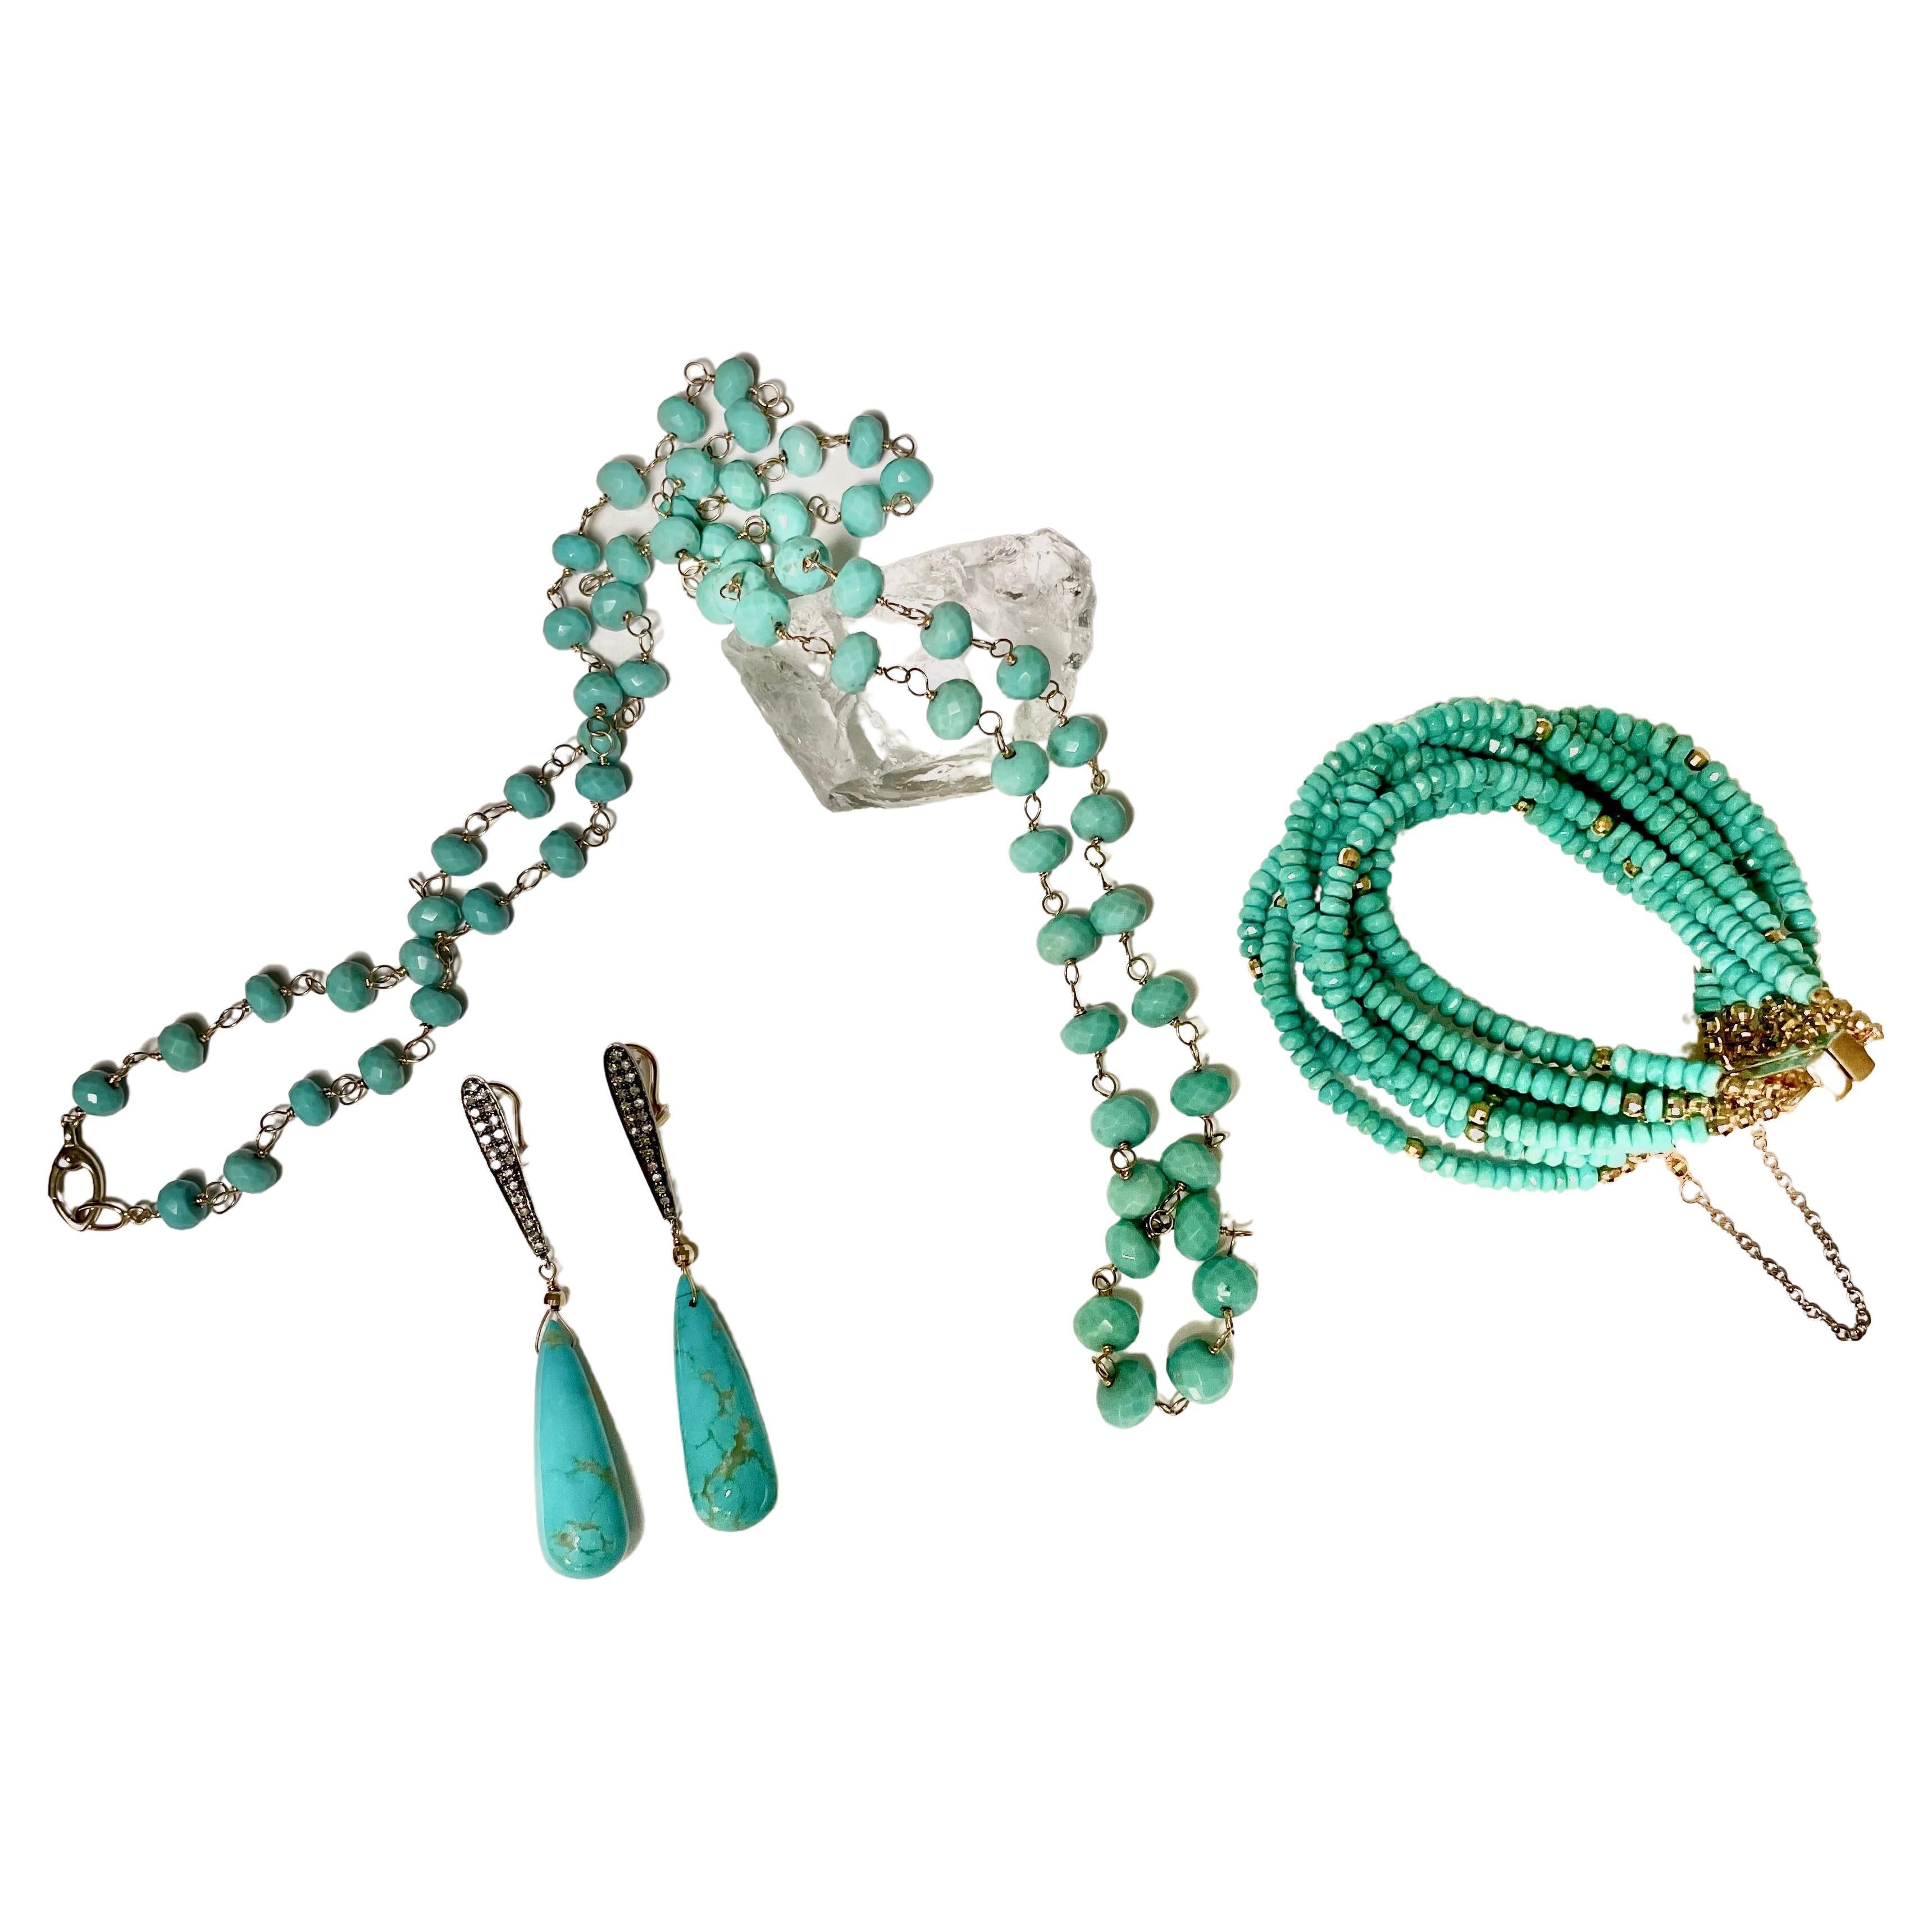 Description
Sleeping Beauty Turquoise 123 carats, accented with 14k balls. Unique, strong magnetic pave diamond vermeil clasp for ease of use, secured with safety chain, ten strand bracelet.                    
Item # B1251
Check out matching